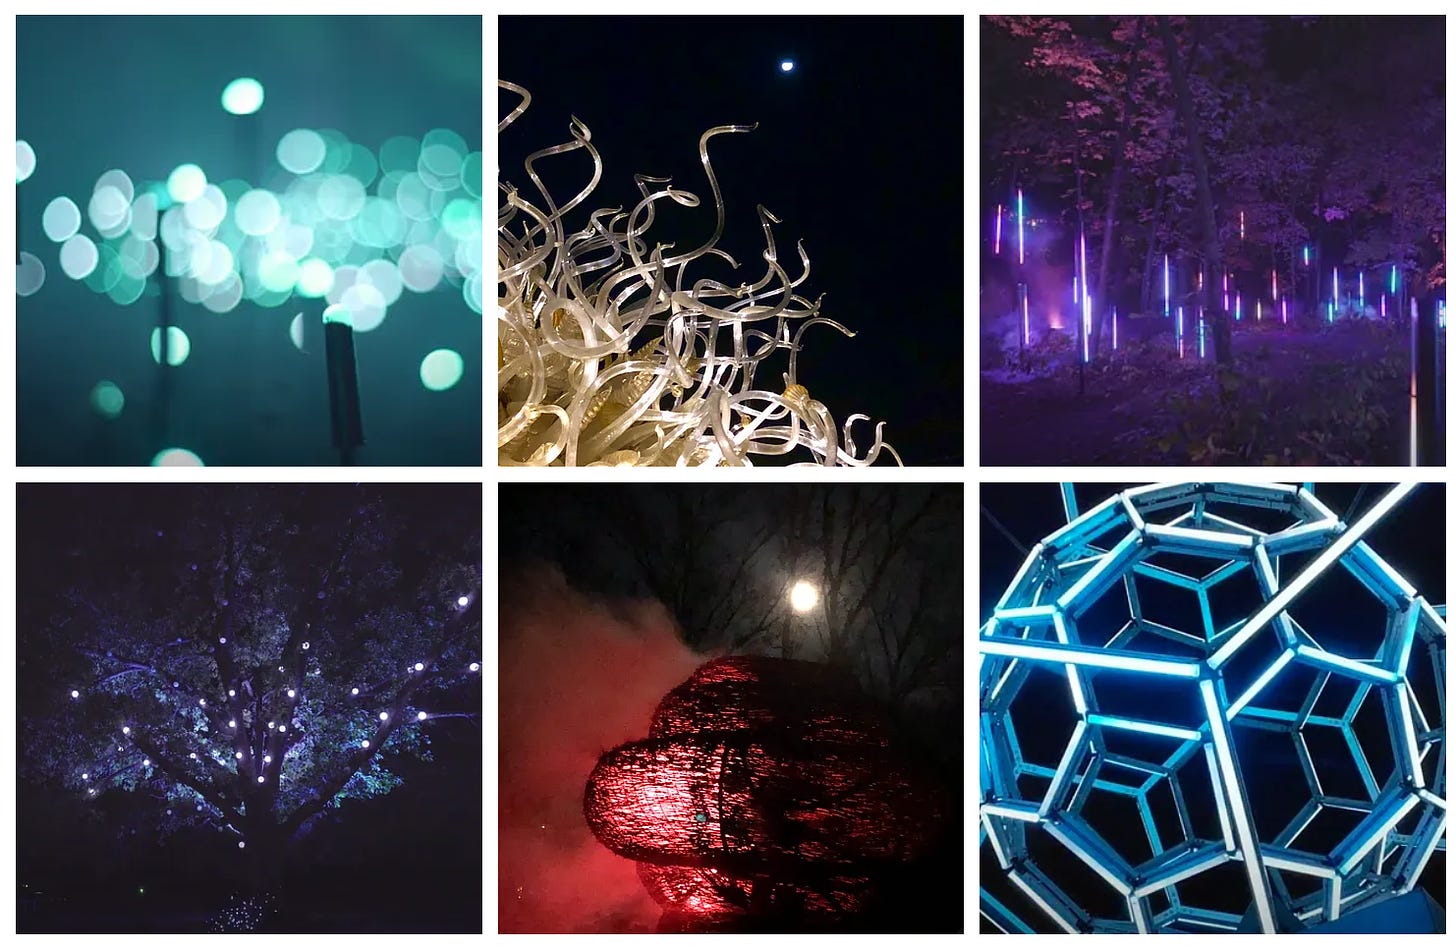 Gallery of turquoise glow-bobs on anemone stalks, golden blown glass, neon light bars in the woods, a tree dotted with white moons, a glowing wicker hearth, a tuquoise LED soccer ball